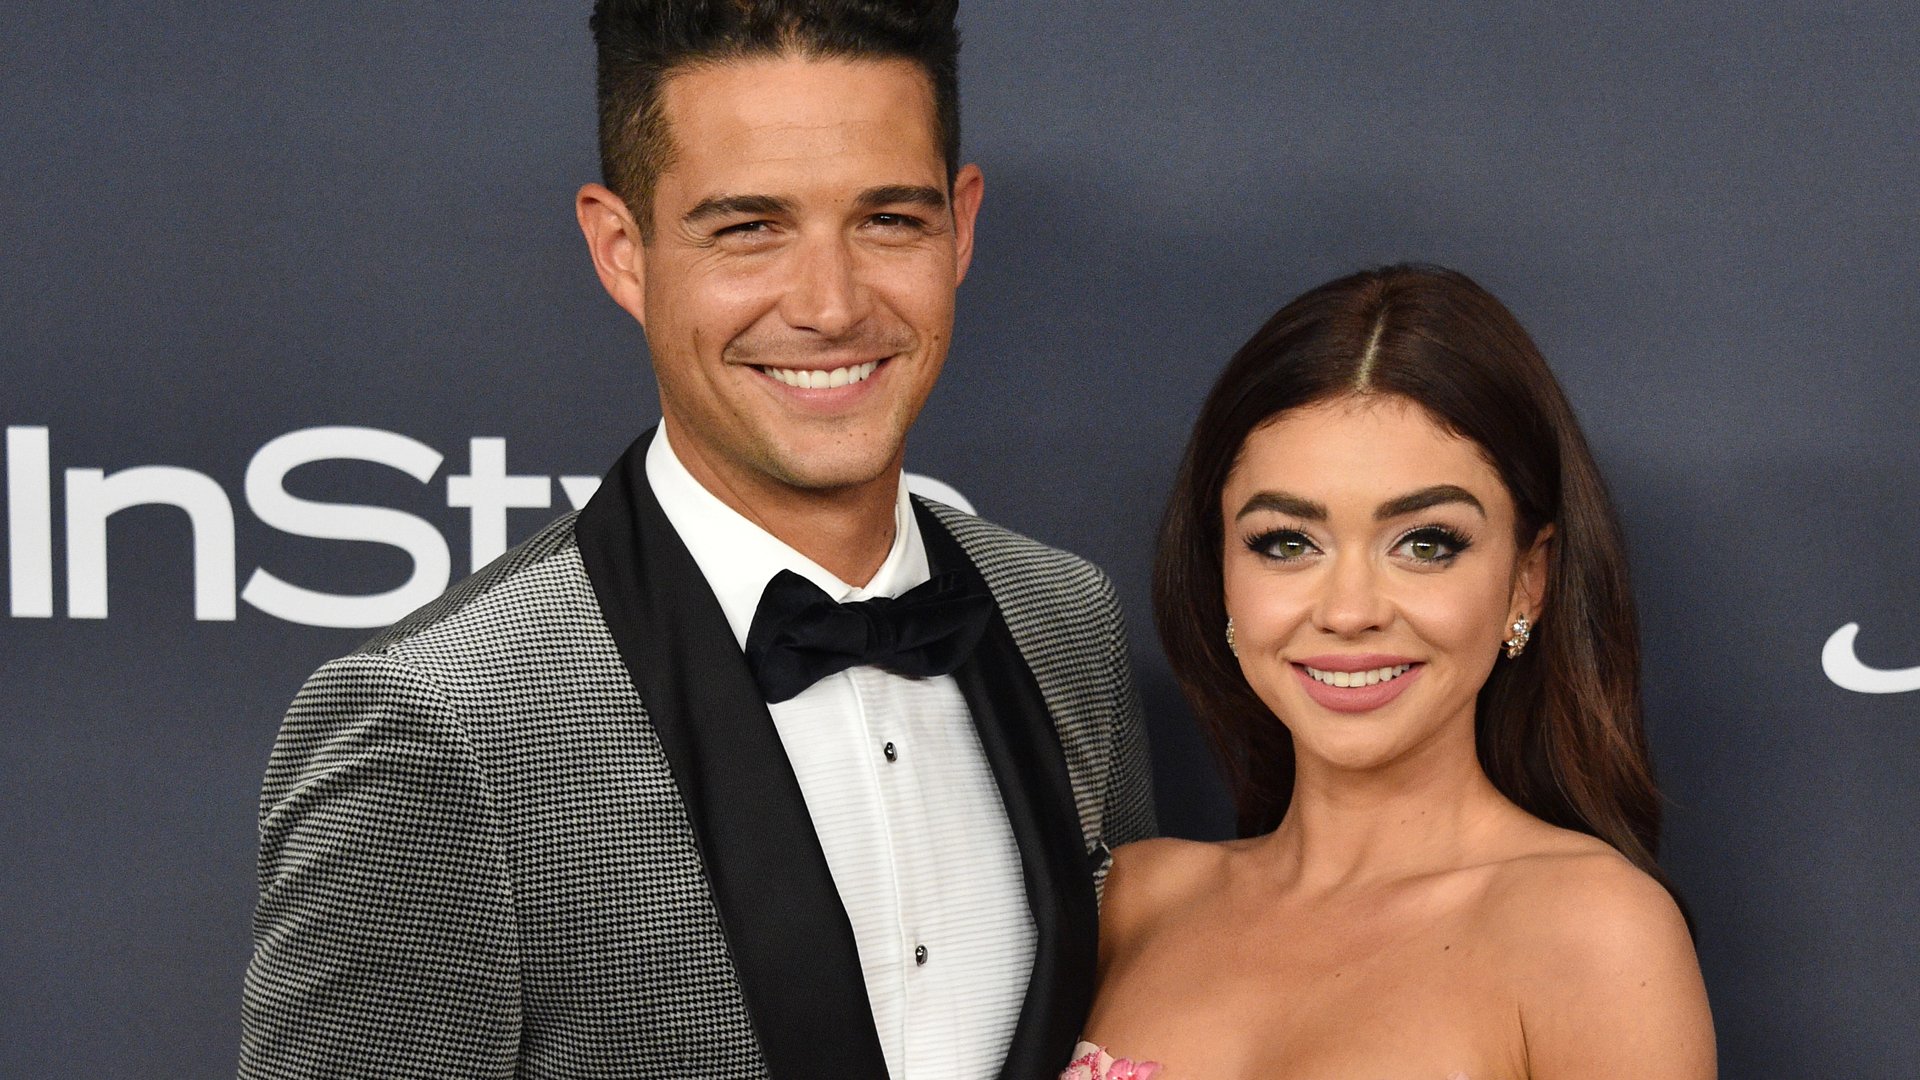 Wells Adams and Sarah Hyland attend the 21st Annual Warner Bros. And InStyle Golden Globe After Party at The Beverly Hilton Hotel on January 05, 2020 in Beverly Hills, California.